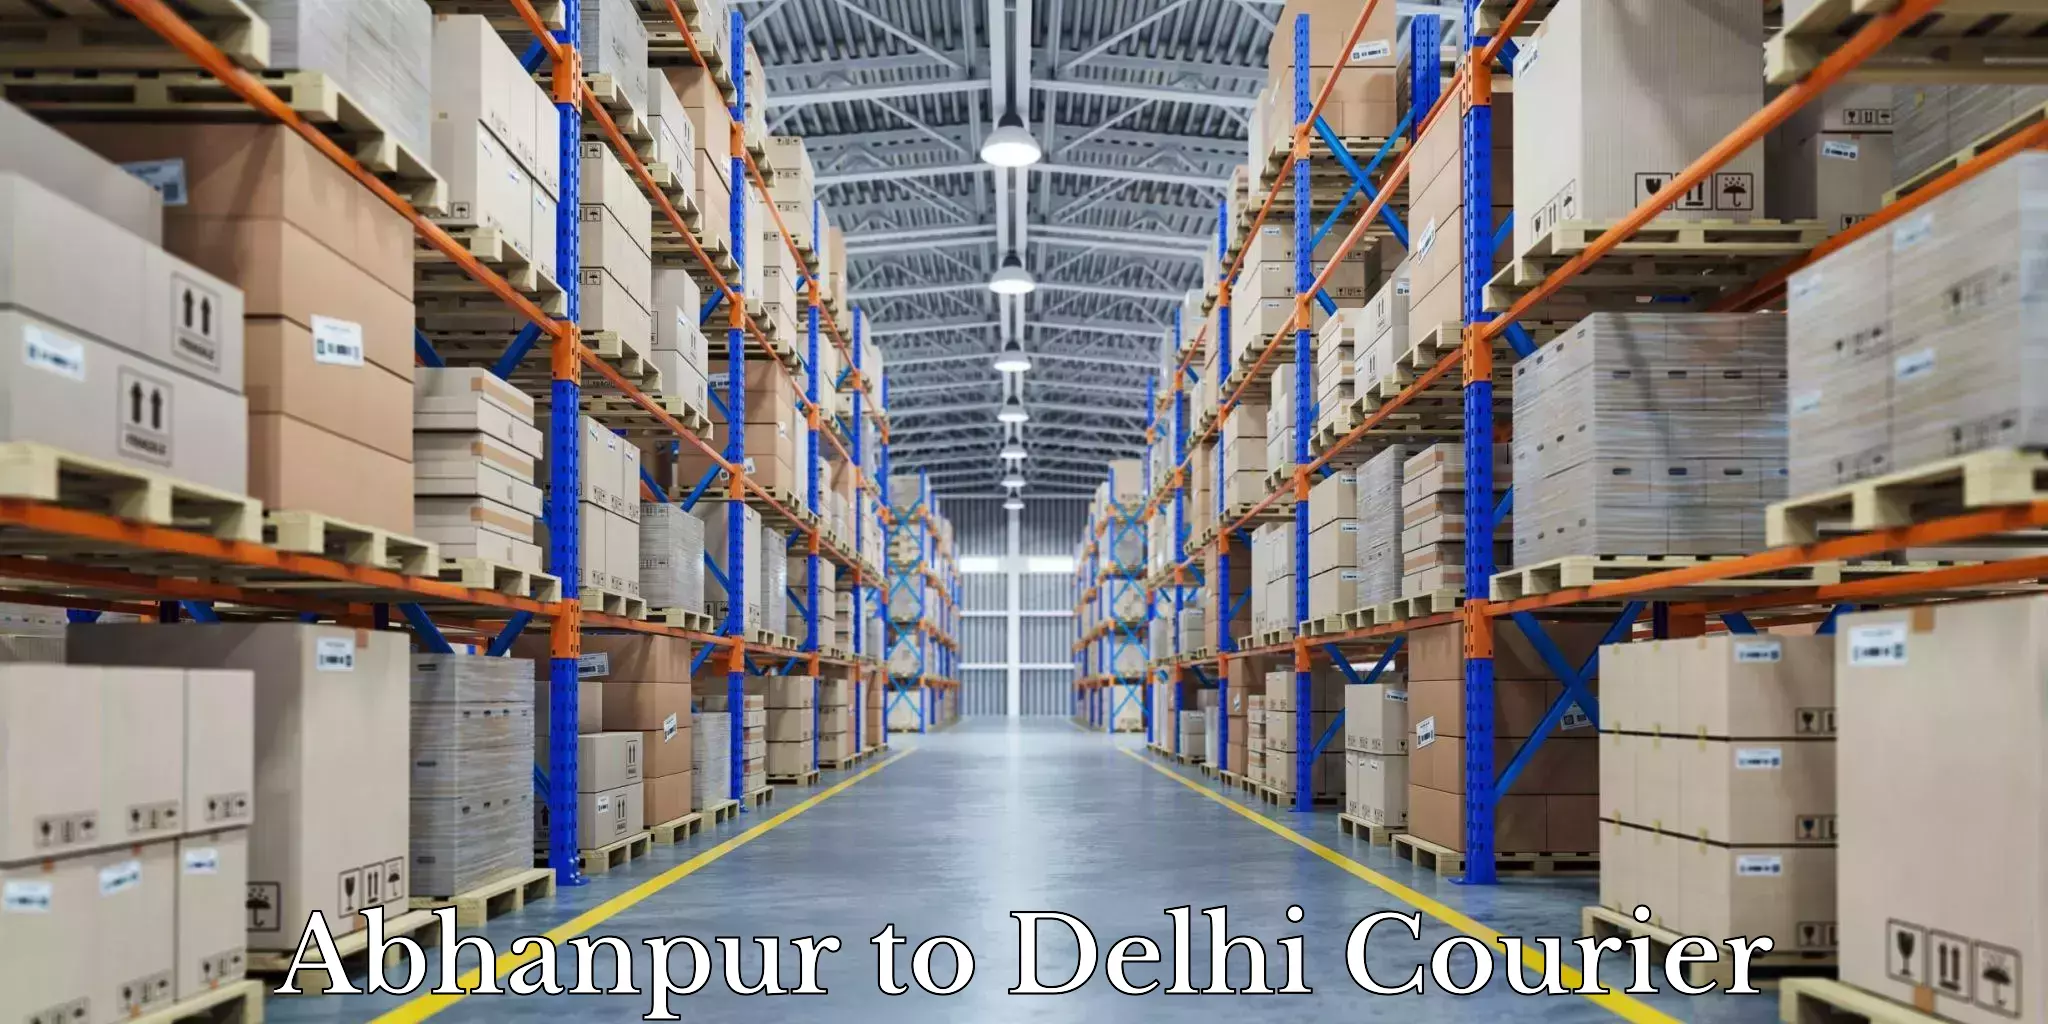 Expert moving and storage in Abhanpur to Kalkaji